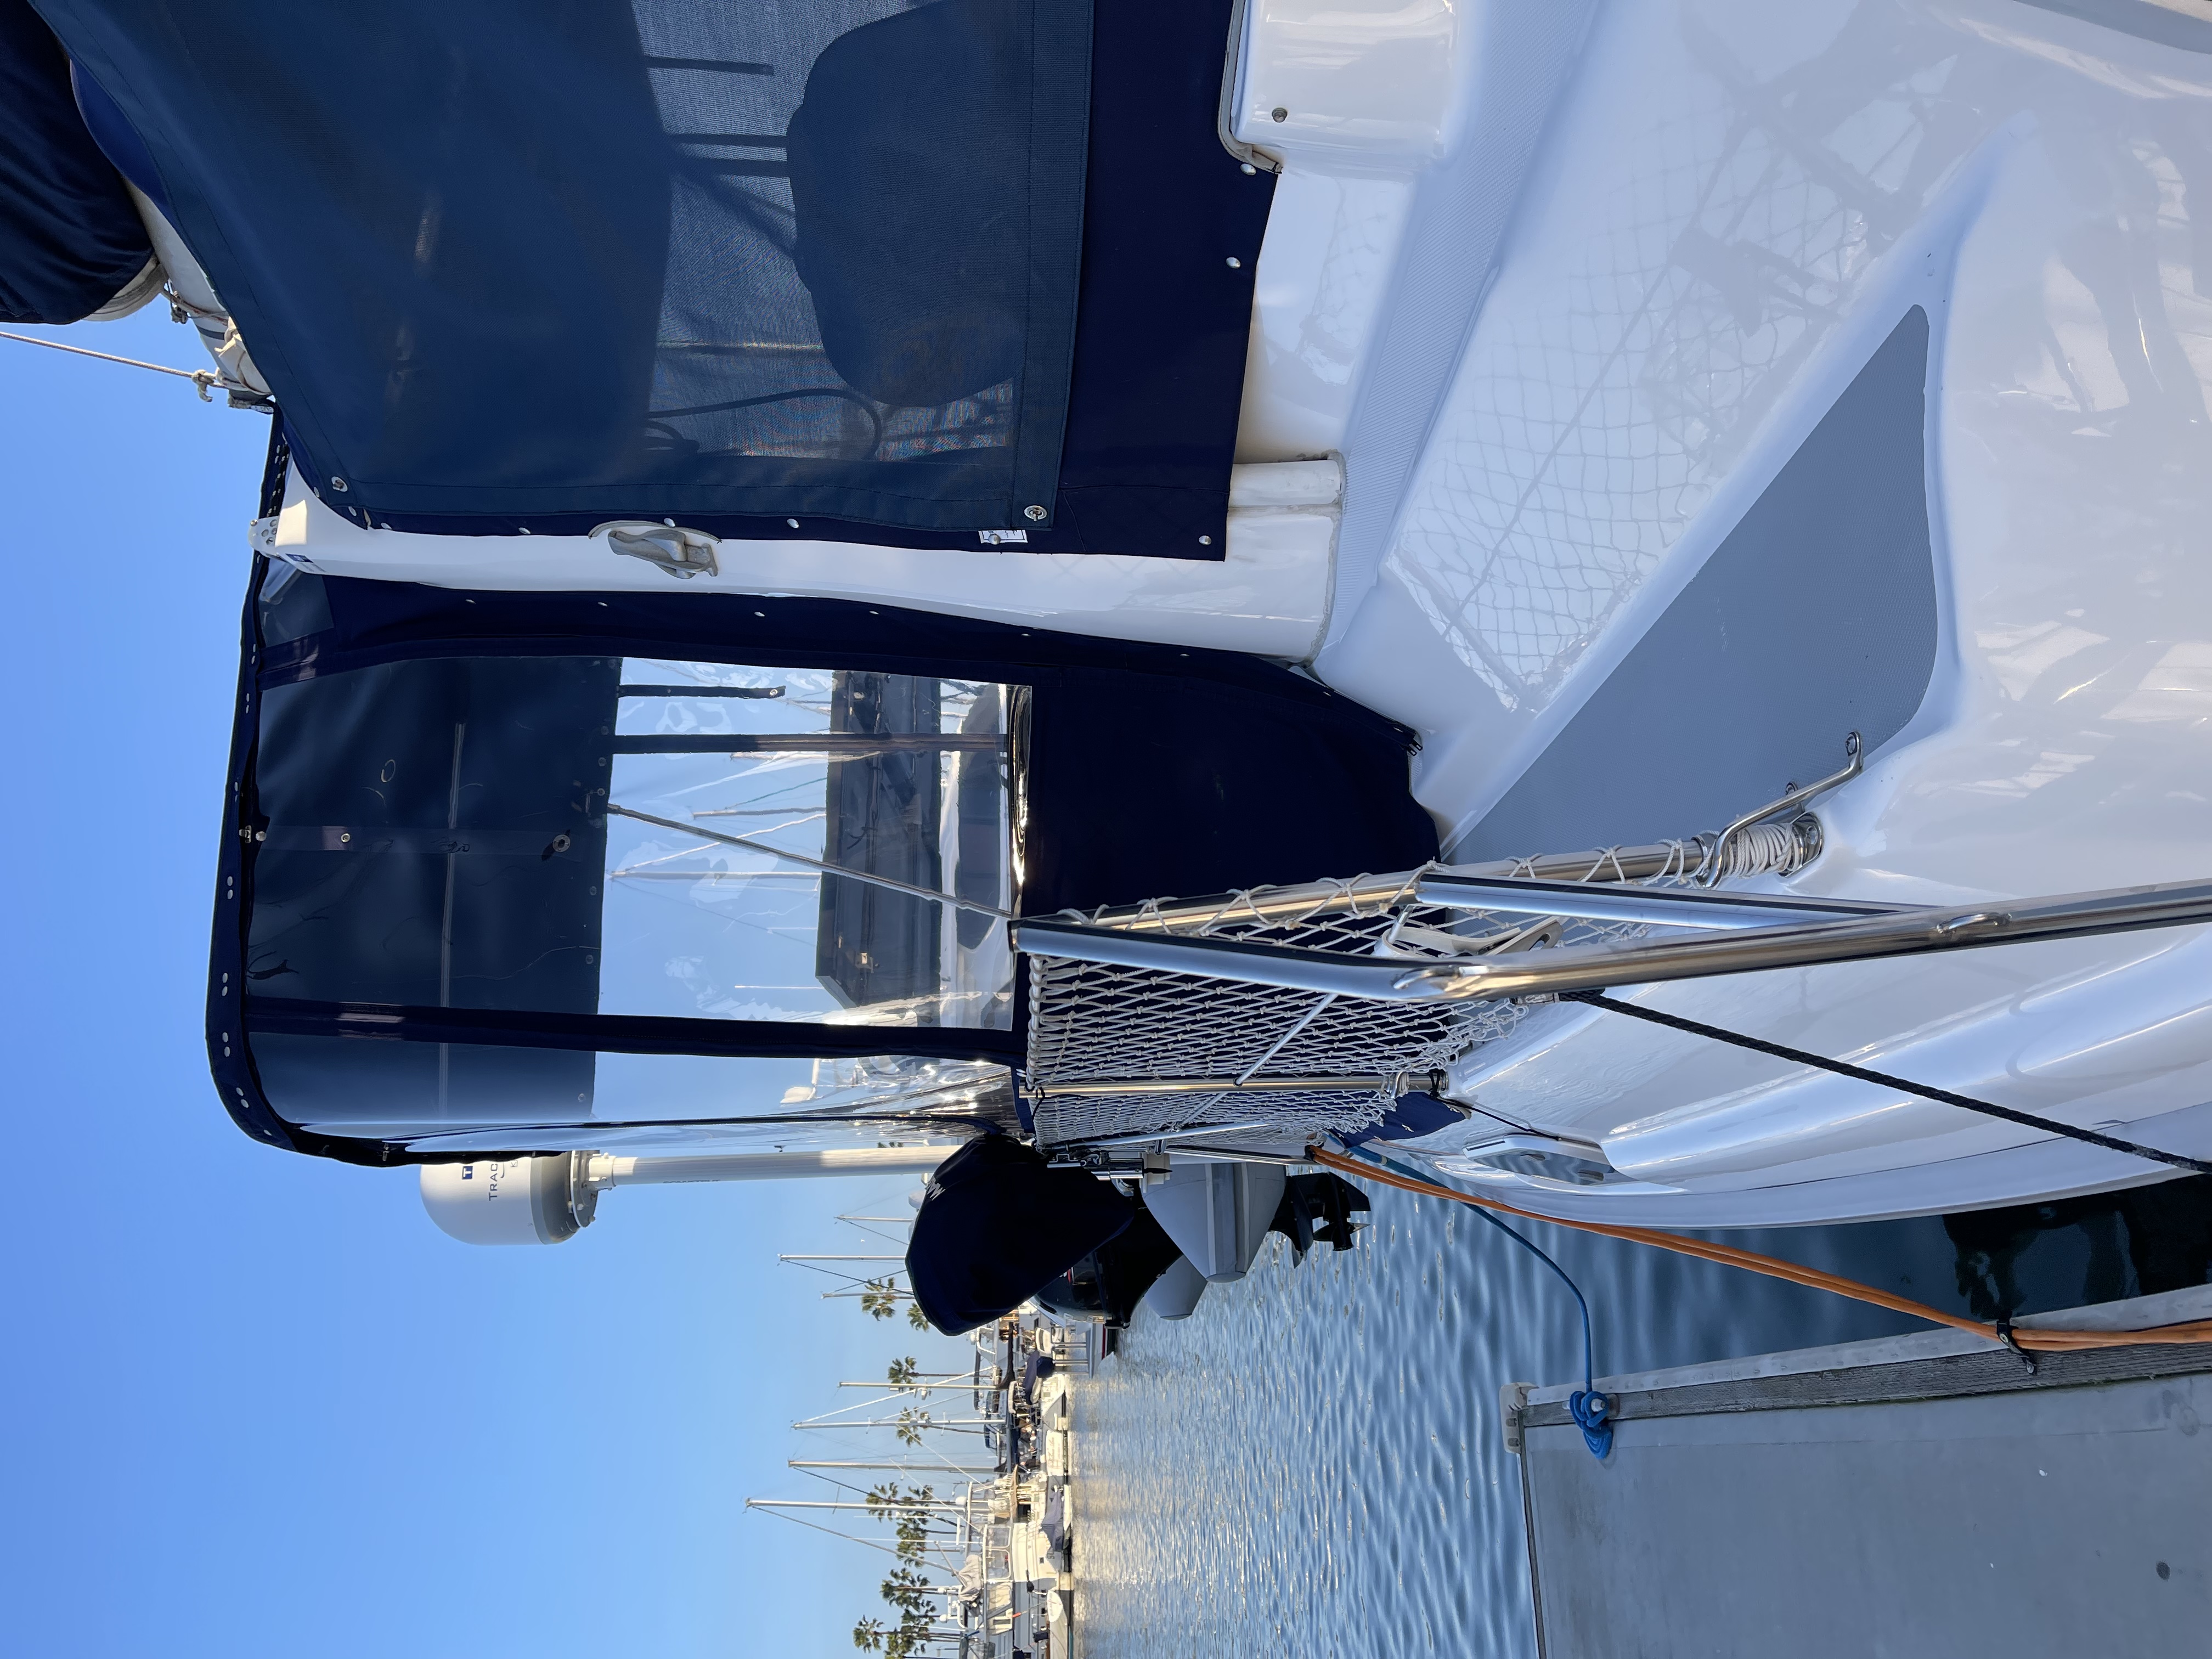 1998 Hunter Passage 450 Sailboat for sale in Long Beach, CA - image 11 